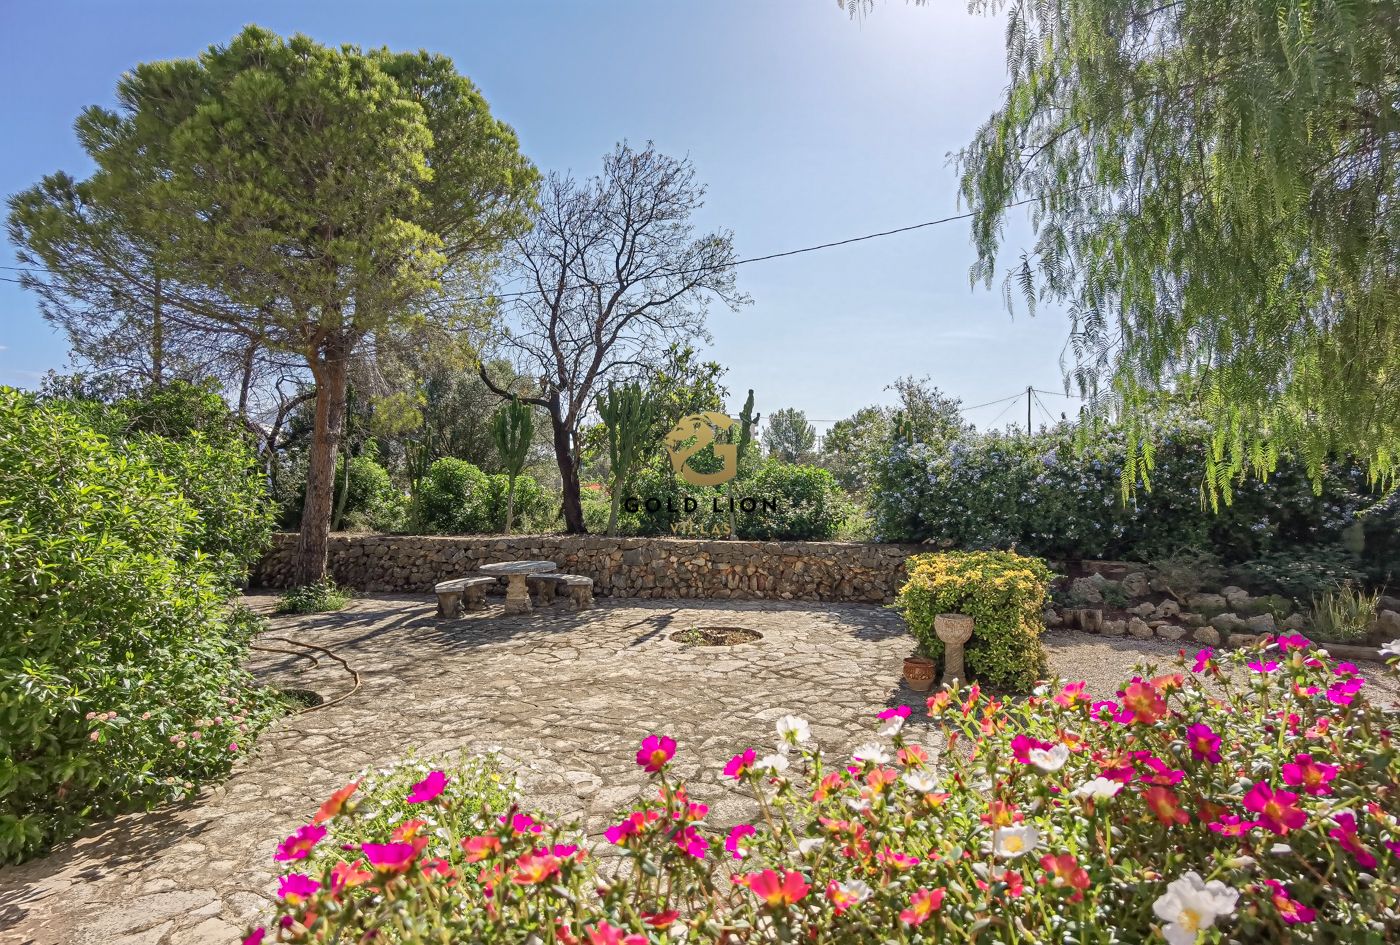 Villa with urban plot of 3010m2 in the most demanded area of Denia.